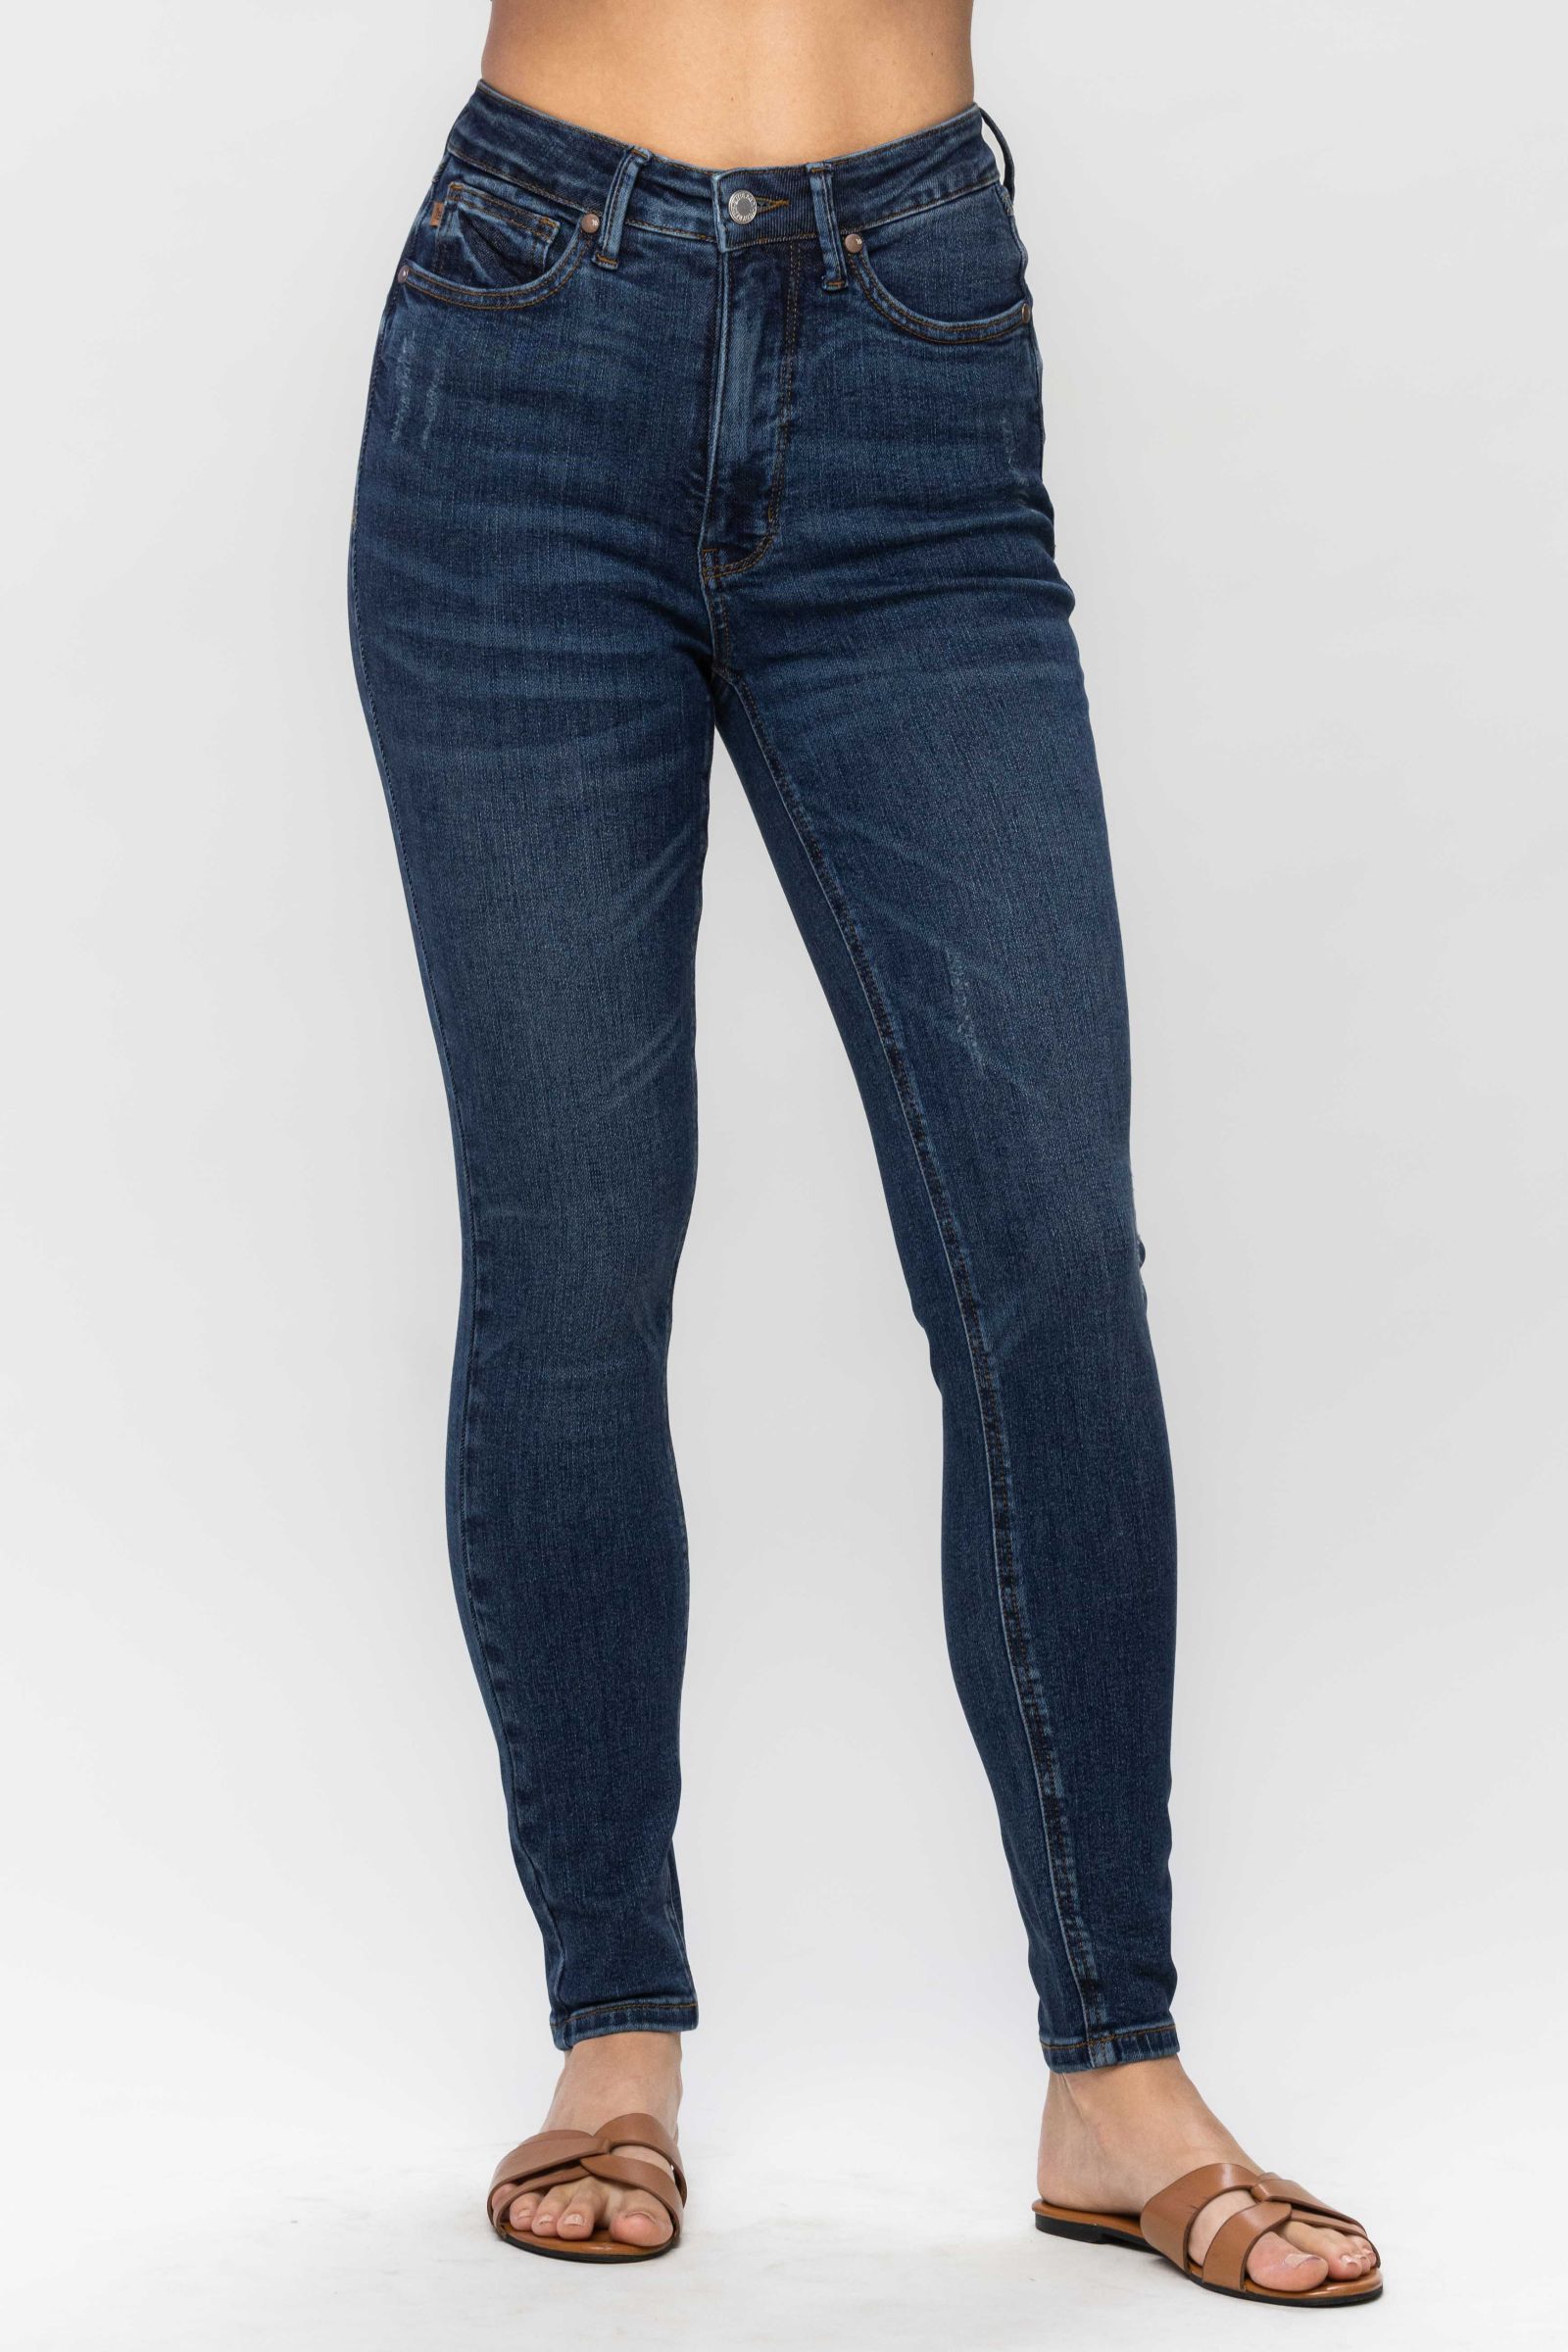 Dion Dark Blue High Waist Skinny Fit Jeans | Pepe Jeans India